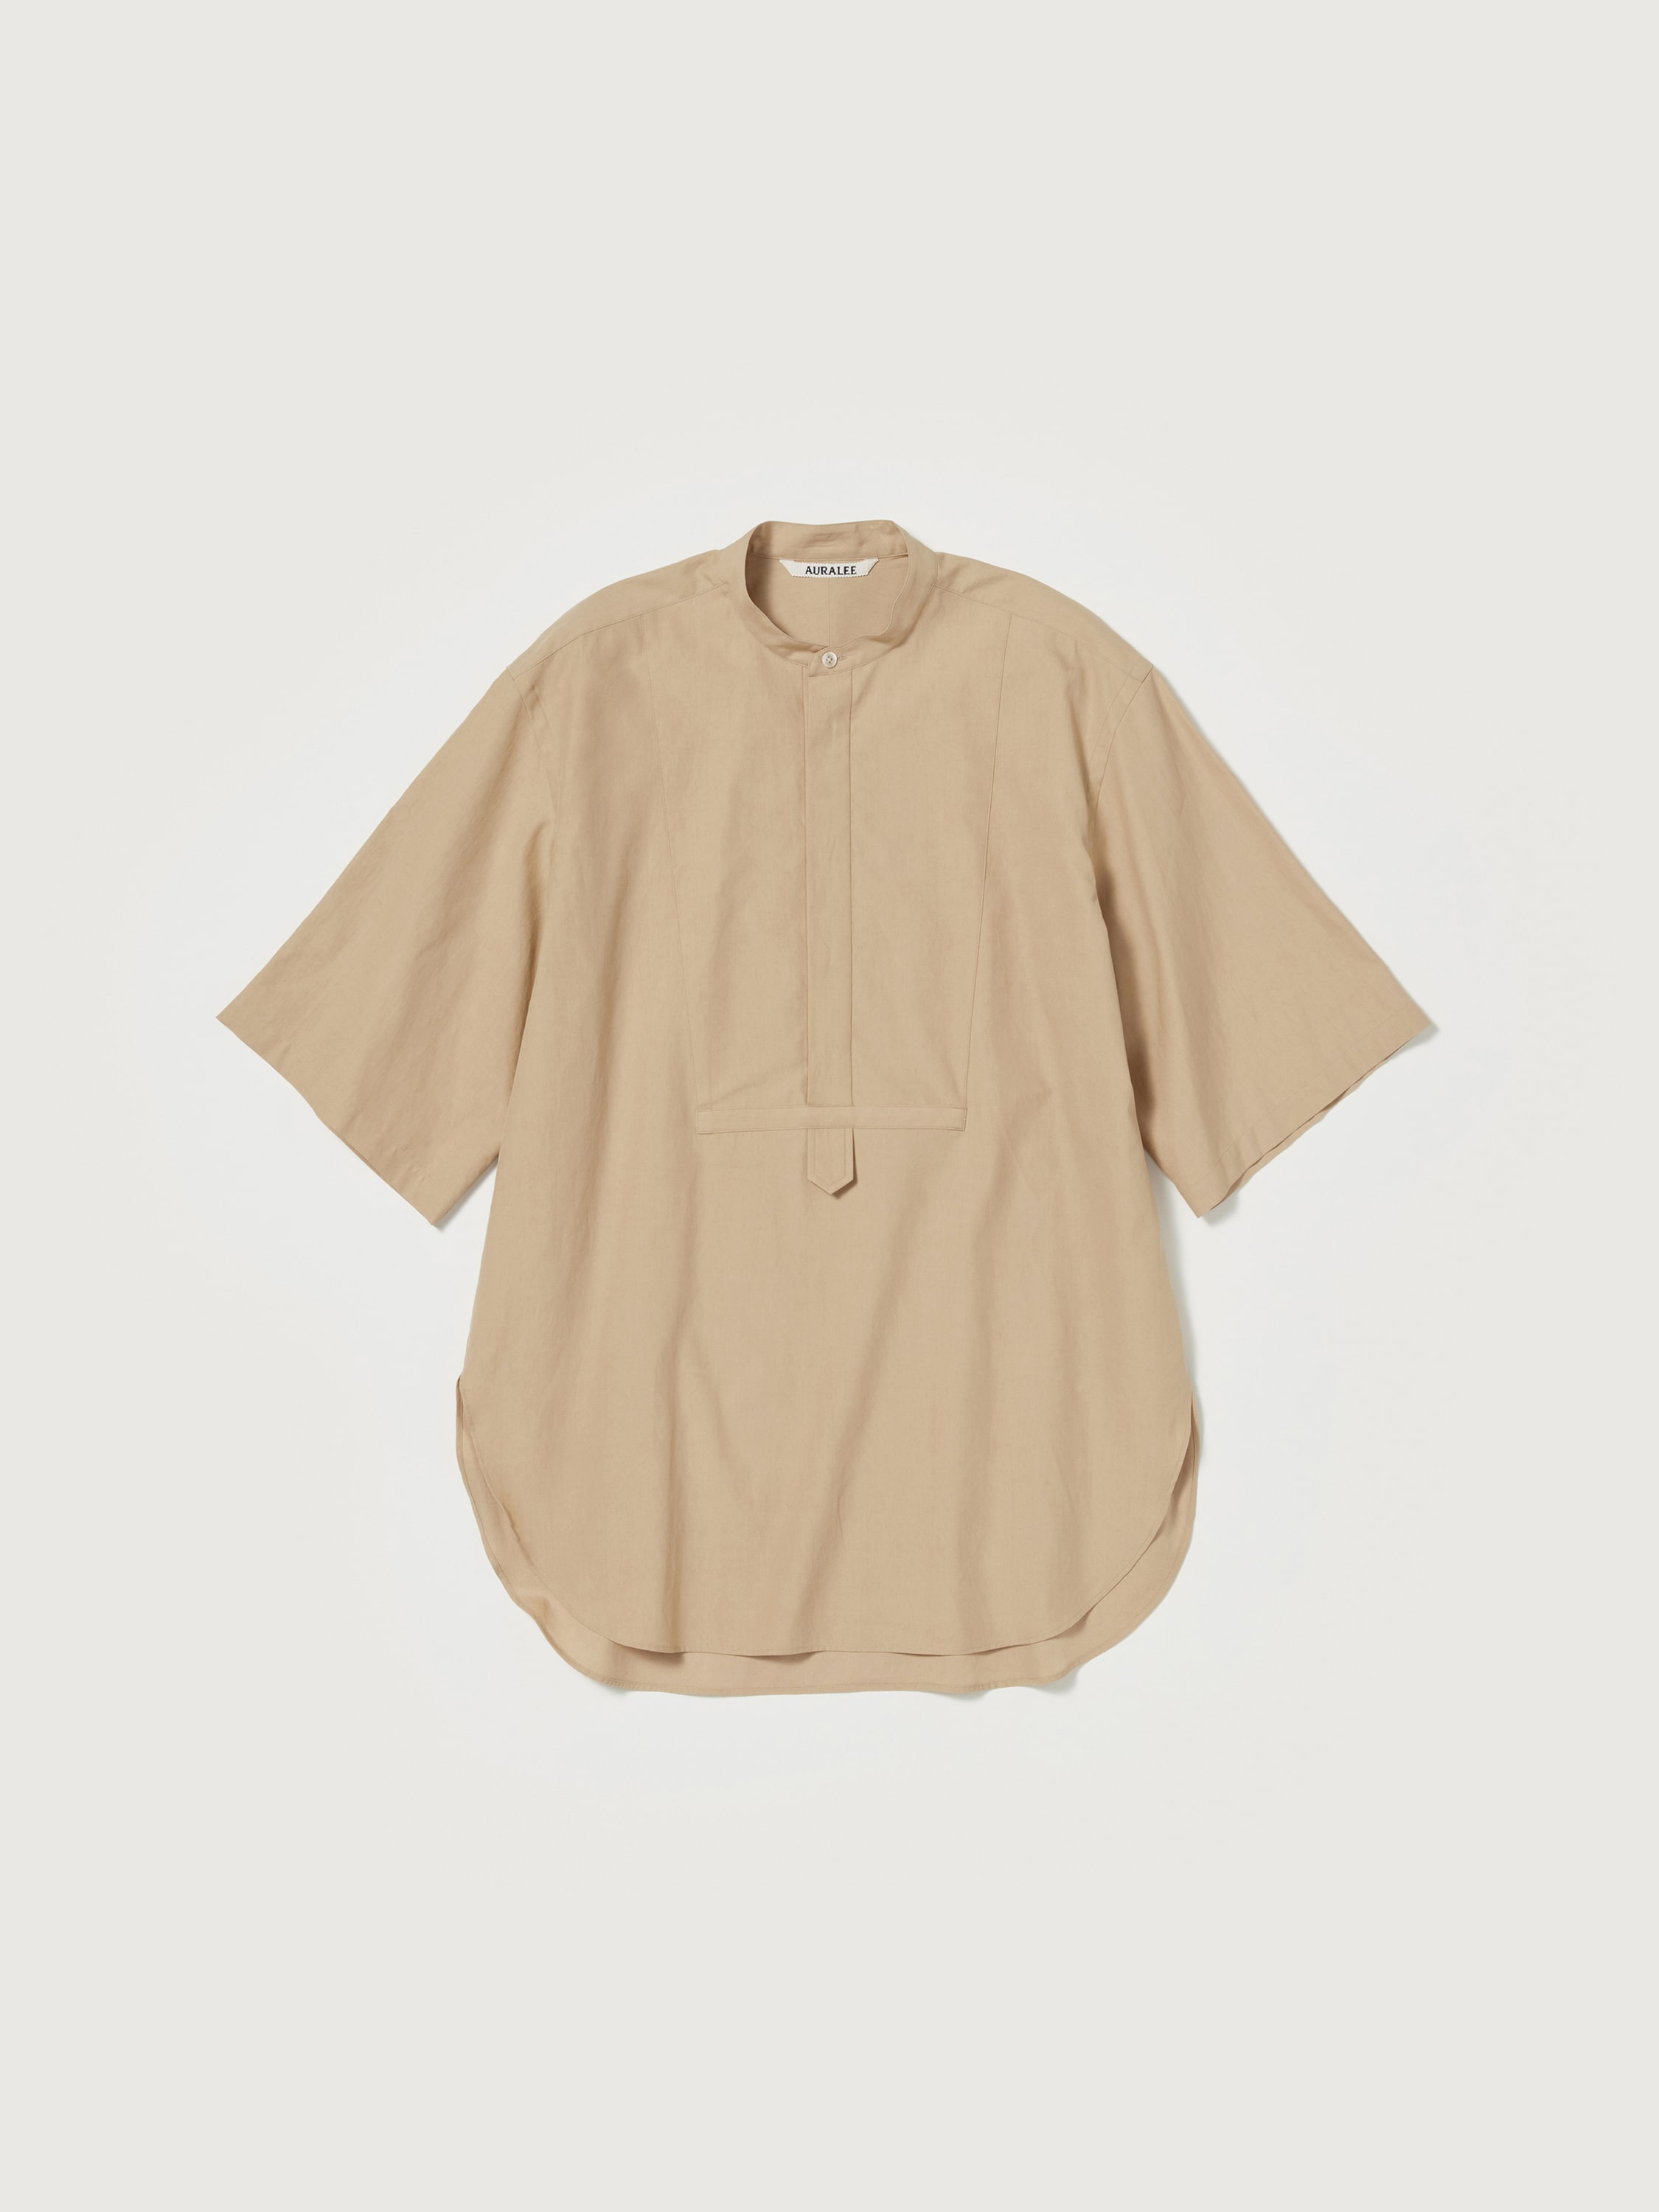 WASHED FINX TWILL HALF SLEEVED P/O SHIRT 詳細画像 LIGHT BROWN 4